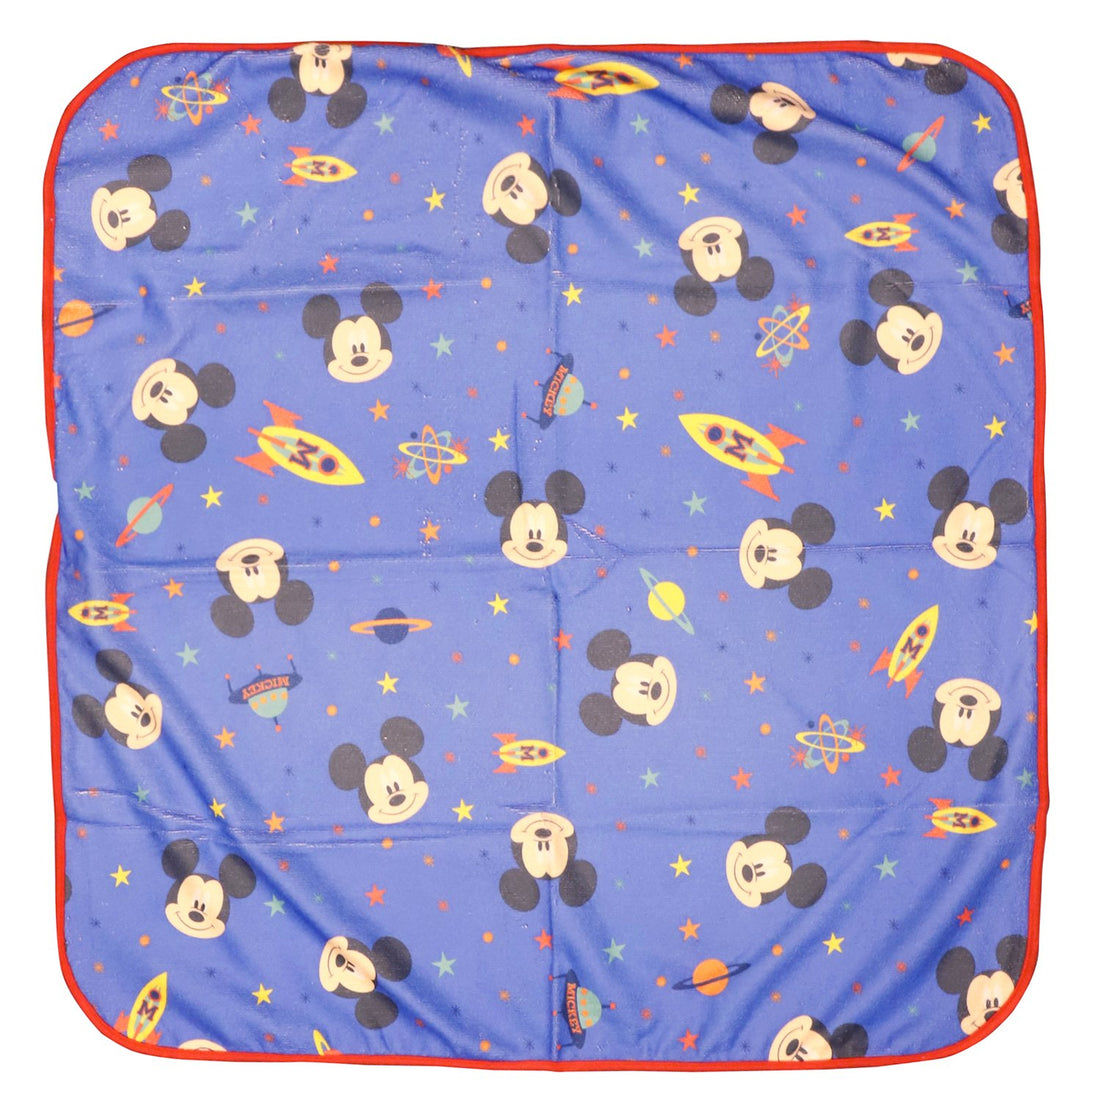 Trendy Apparel Shop Boy's Mickey Mouse Square Hooded Towel